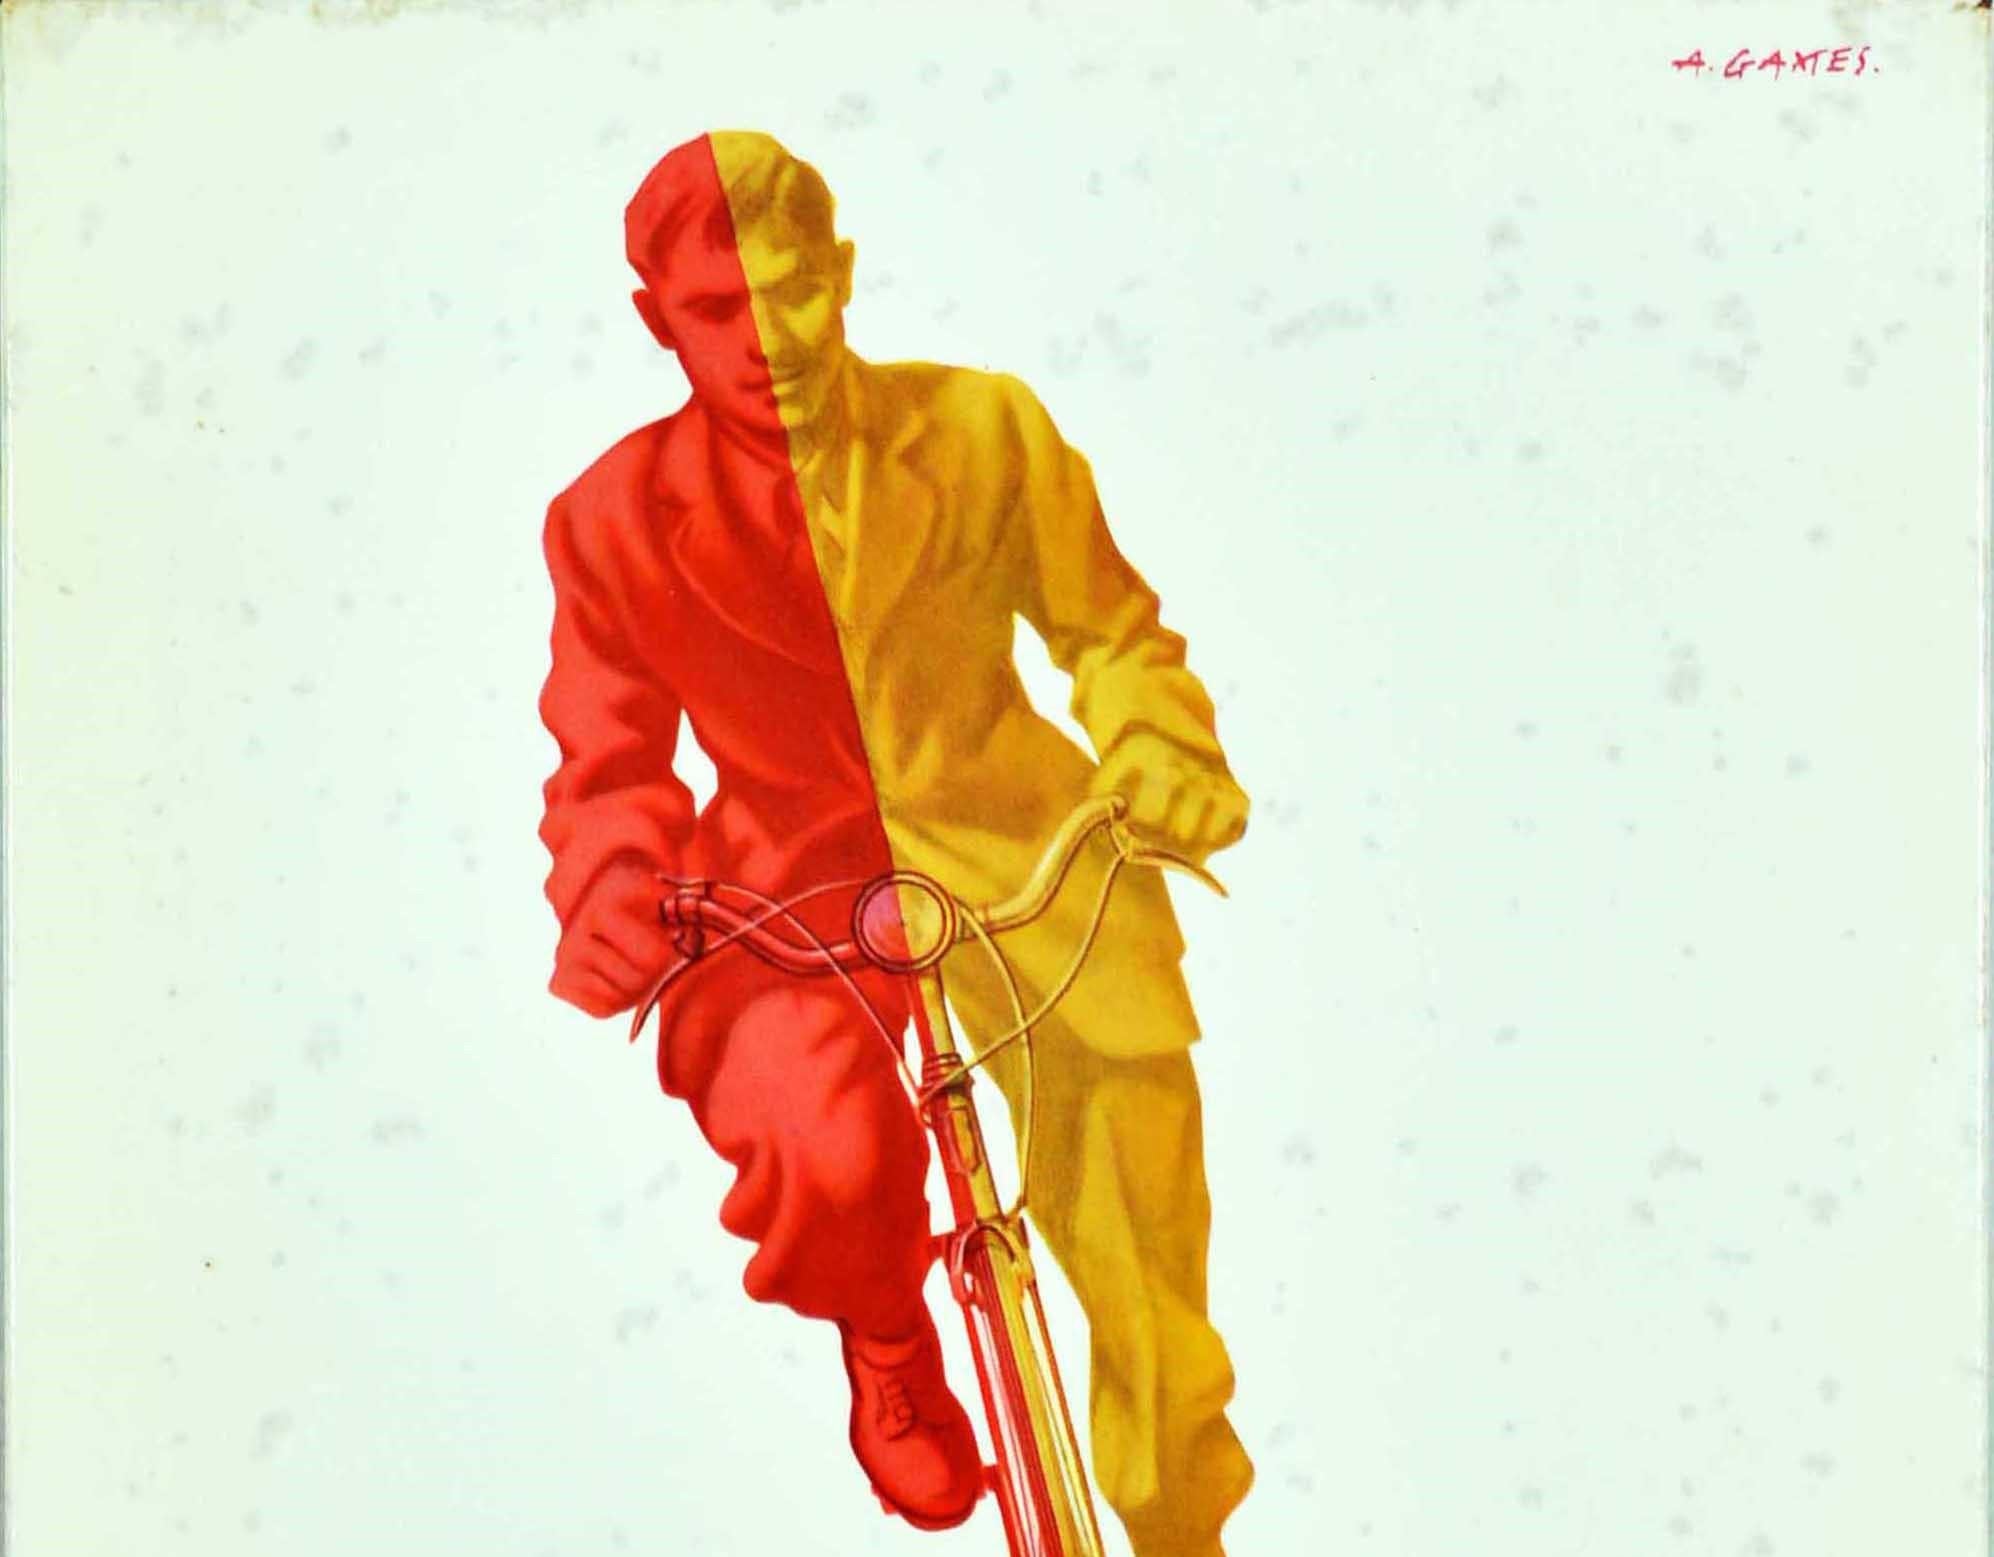 Original vintage desktop advertising standee poster for The Coventry Cycle Chain featuring a great design by the notable British graphic designer Abram Games (Abraham Gamse; 1914-1996) depicting a cyclist wearing a suit and tie in red and yellow